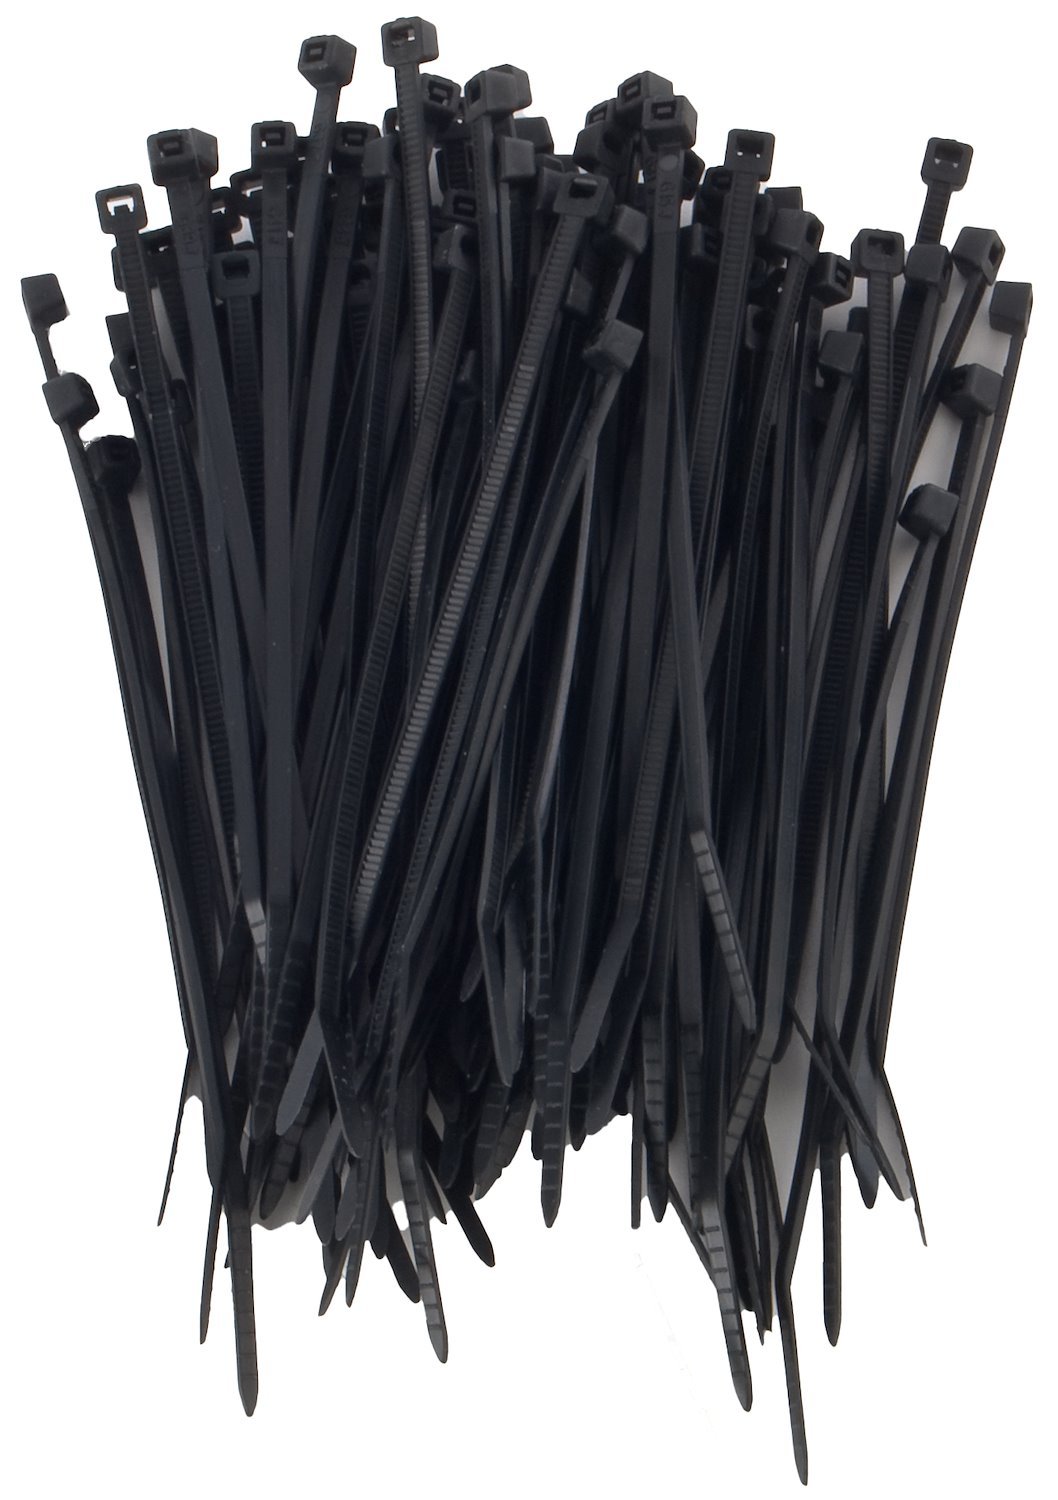 Nylon Wire and Cable Ties [4 in. Black]